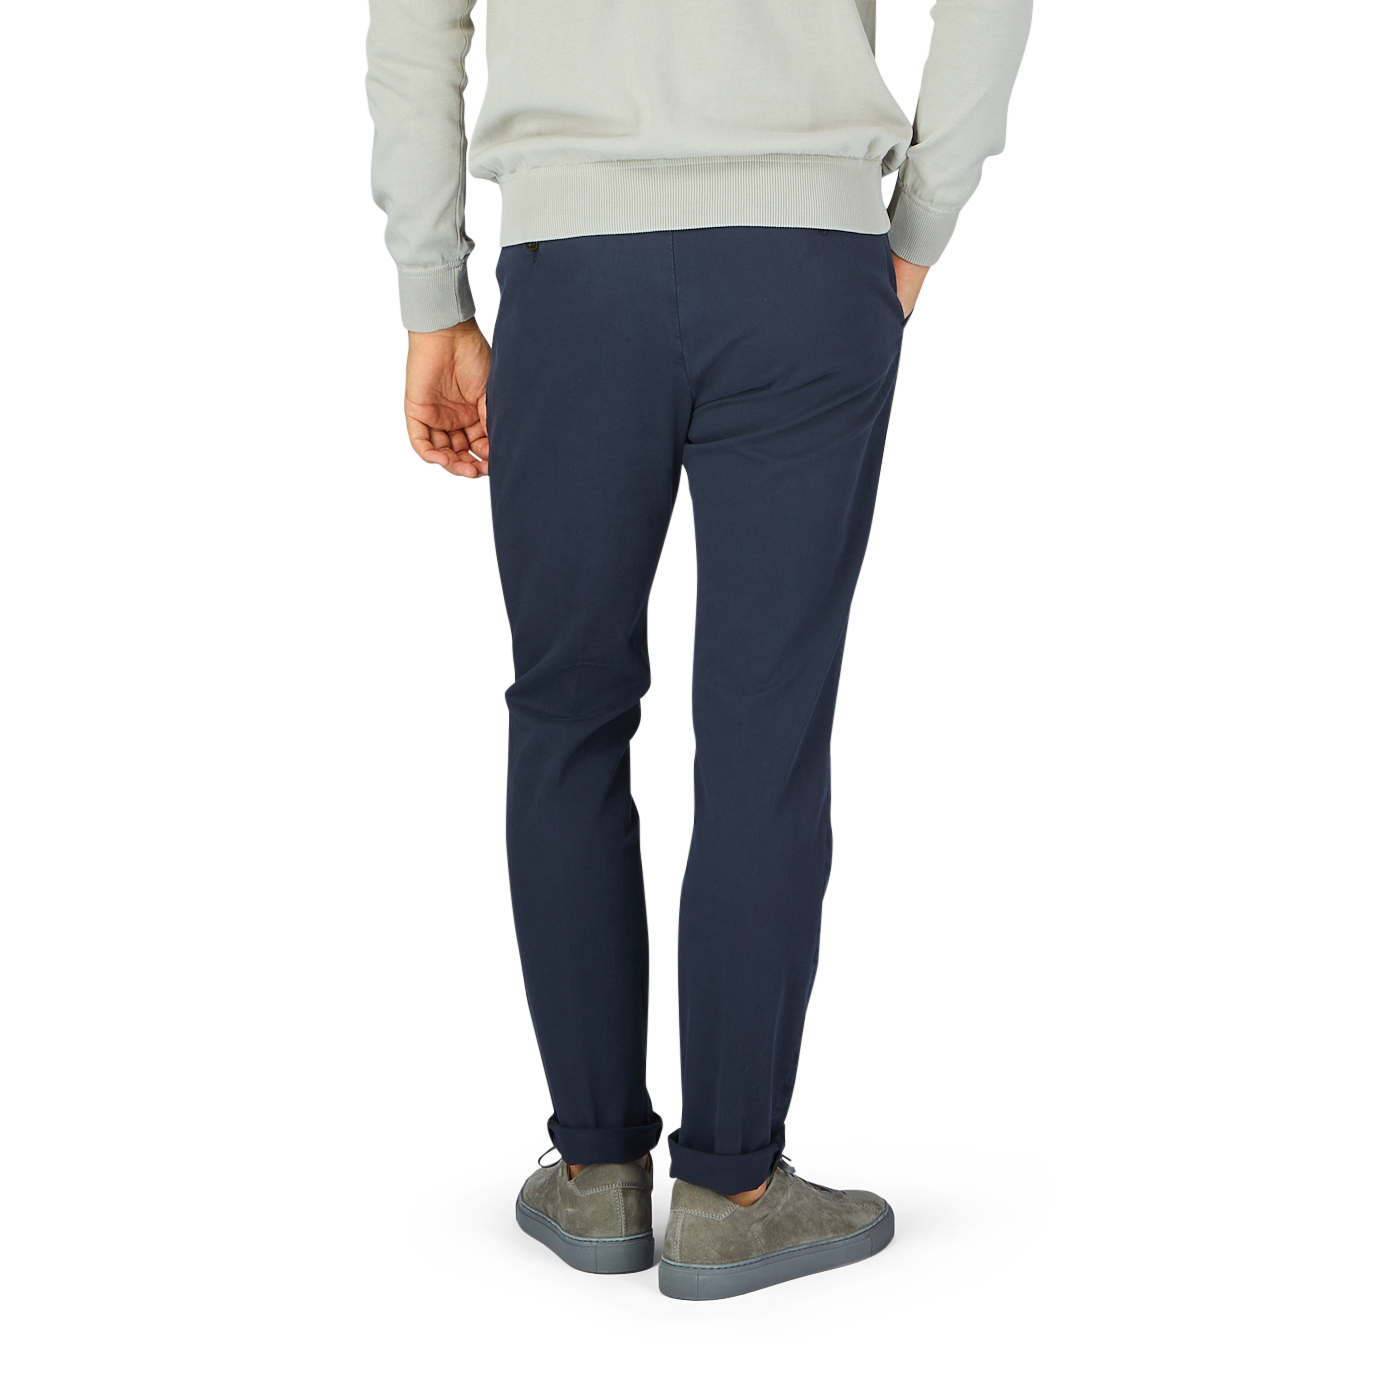 The back view of a man wearing Briglia Navy Blue Cotton Stretch BG62 Casual Chinos designed by an Italian trouser specialist.